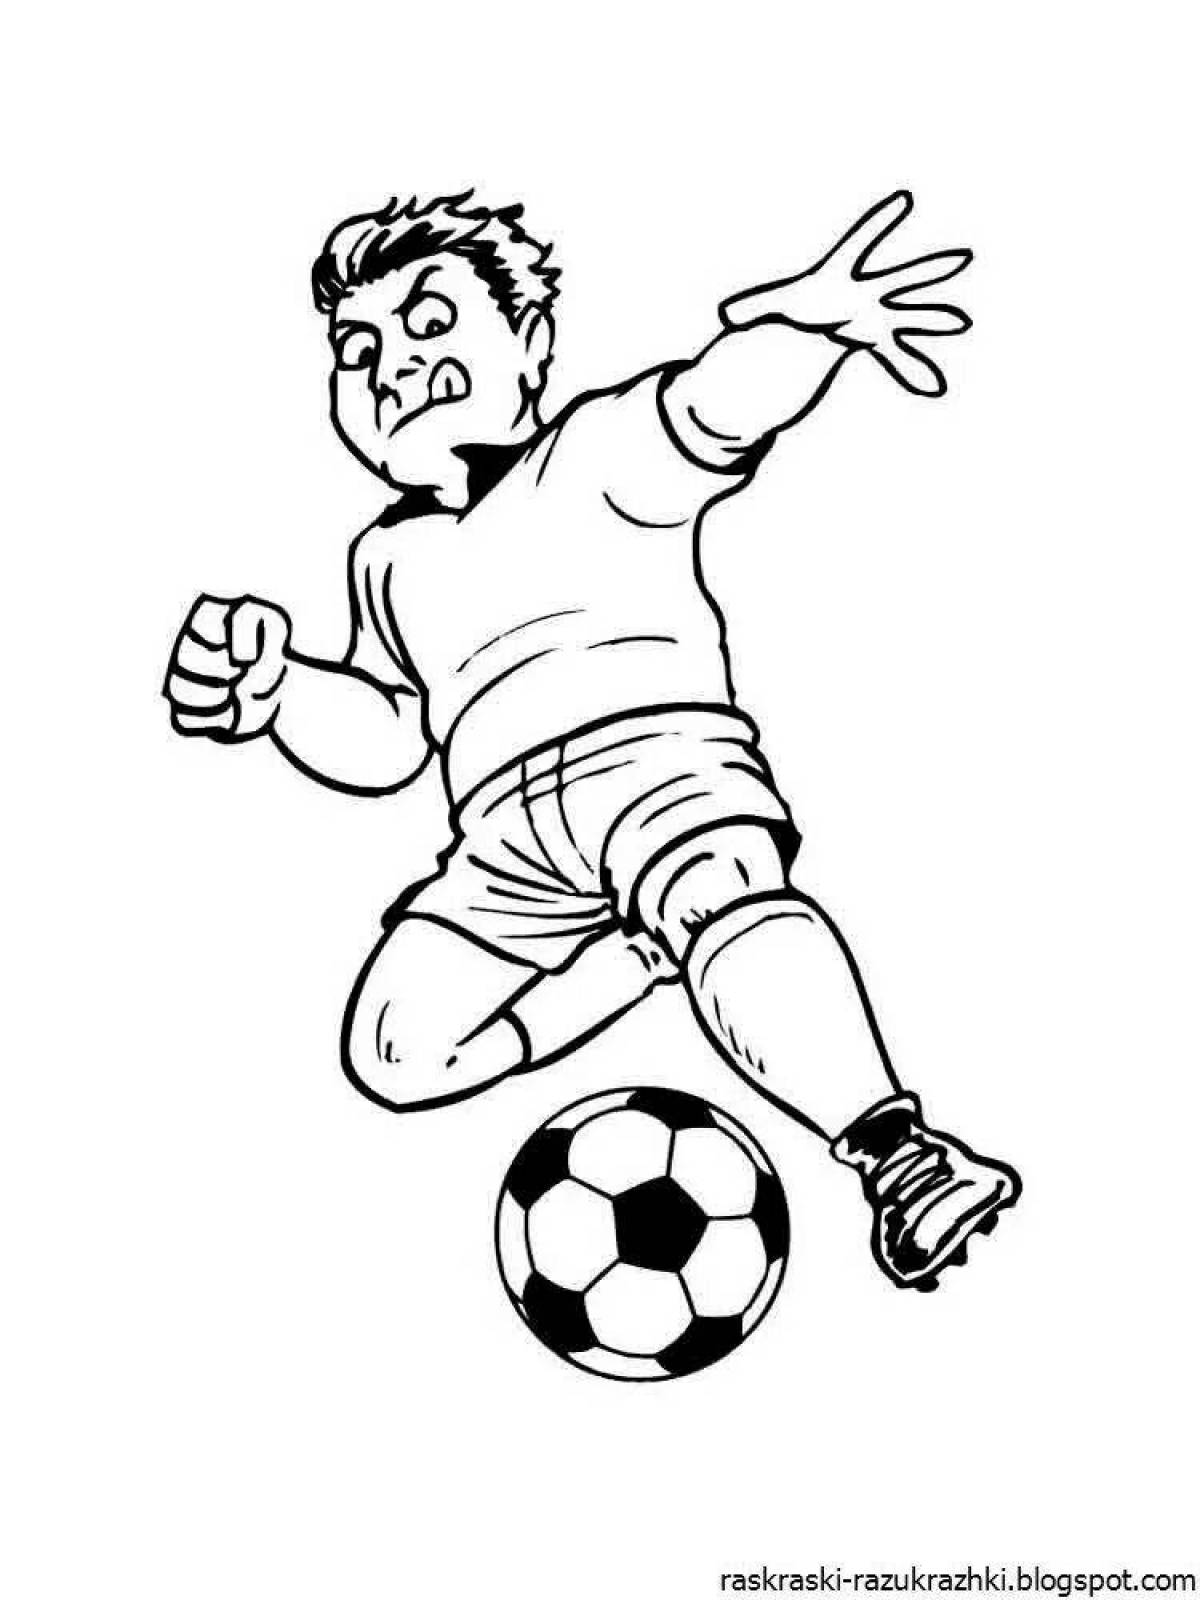 Fun coloring page player